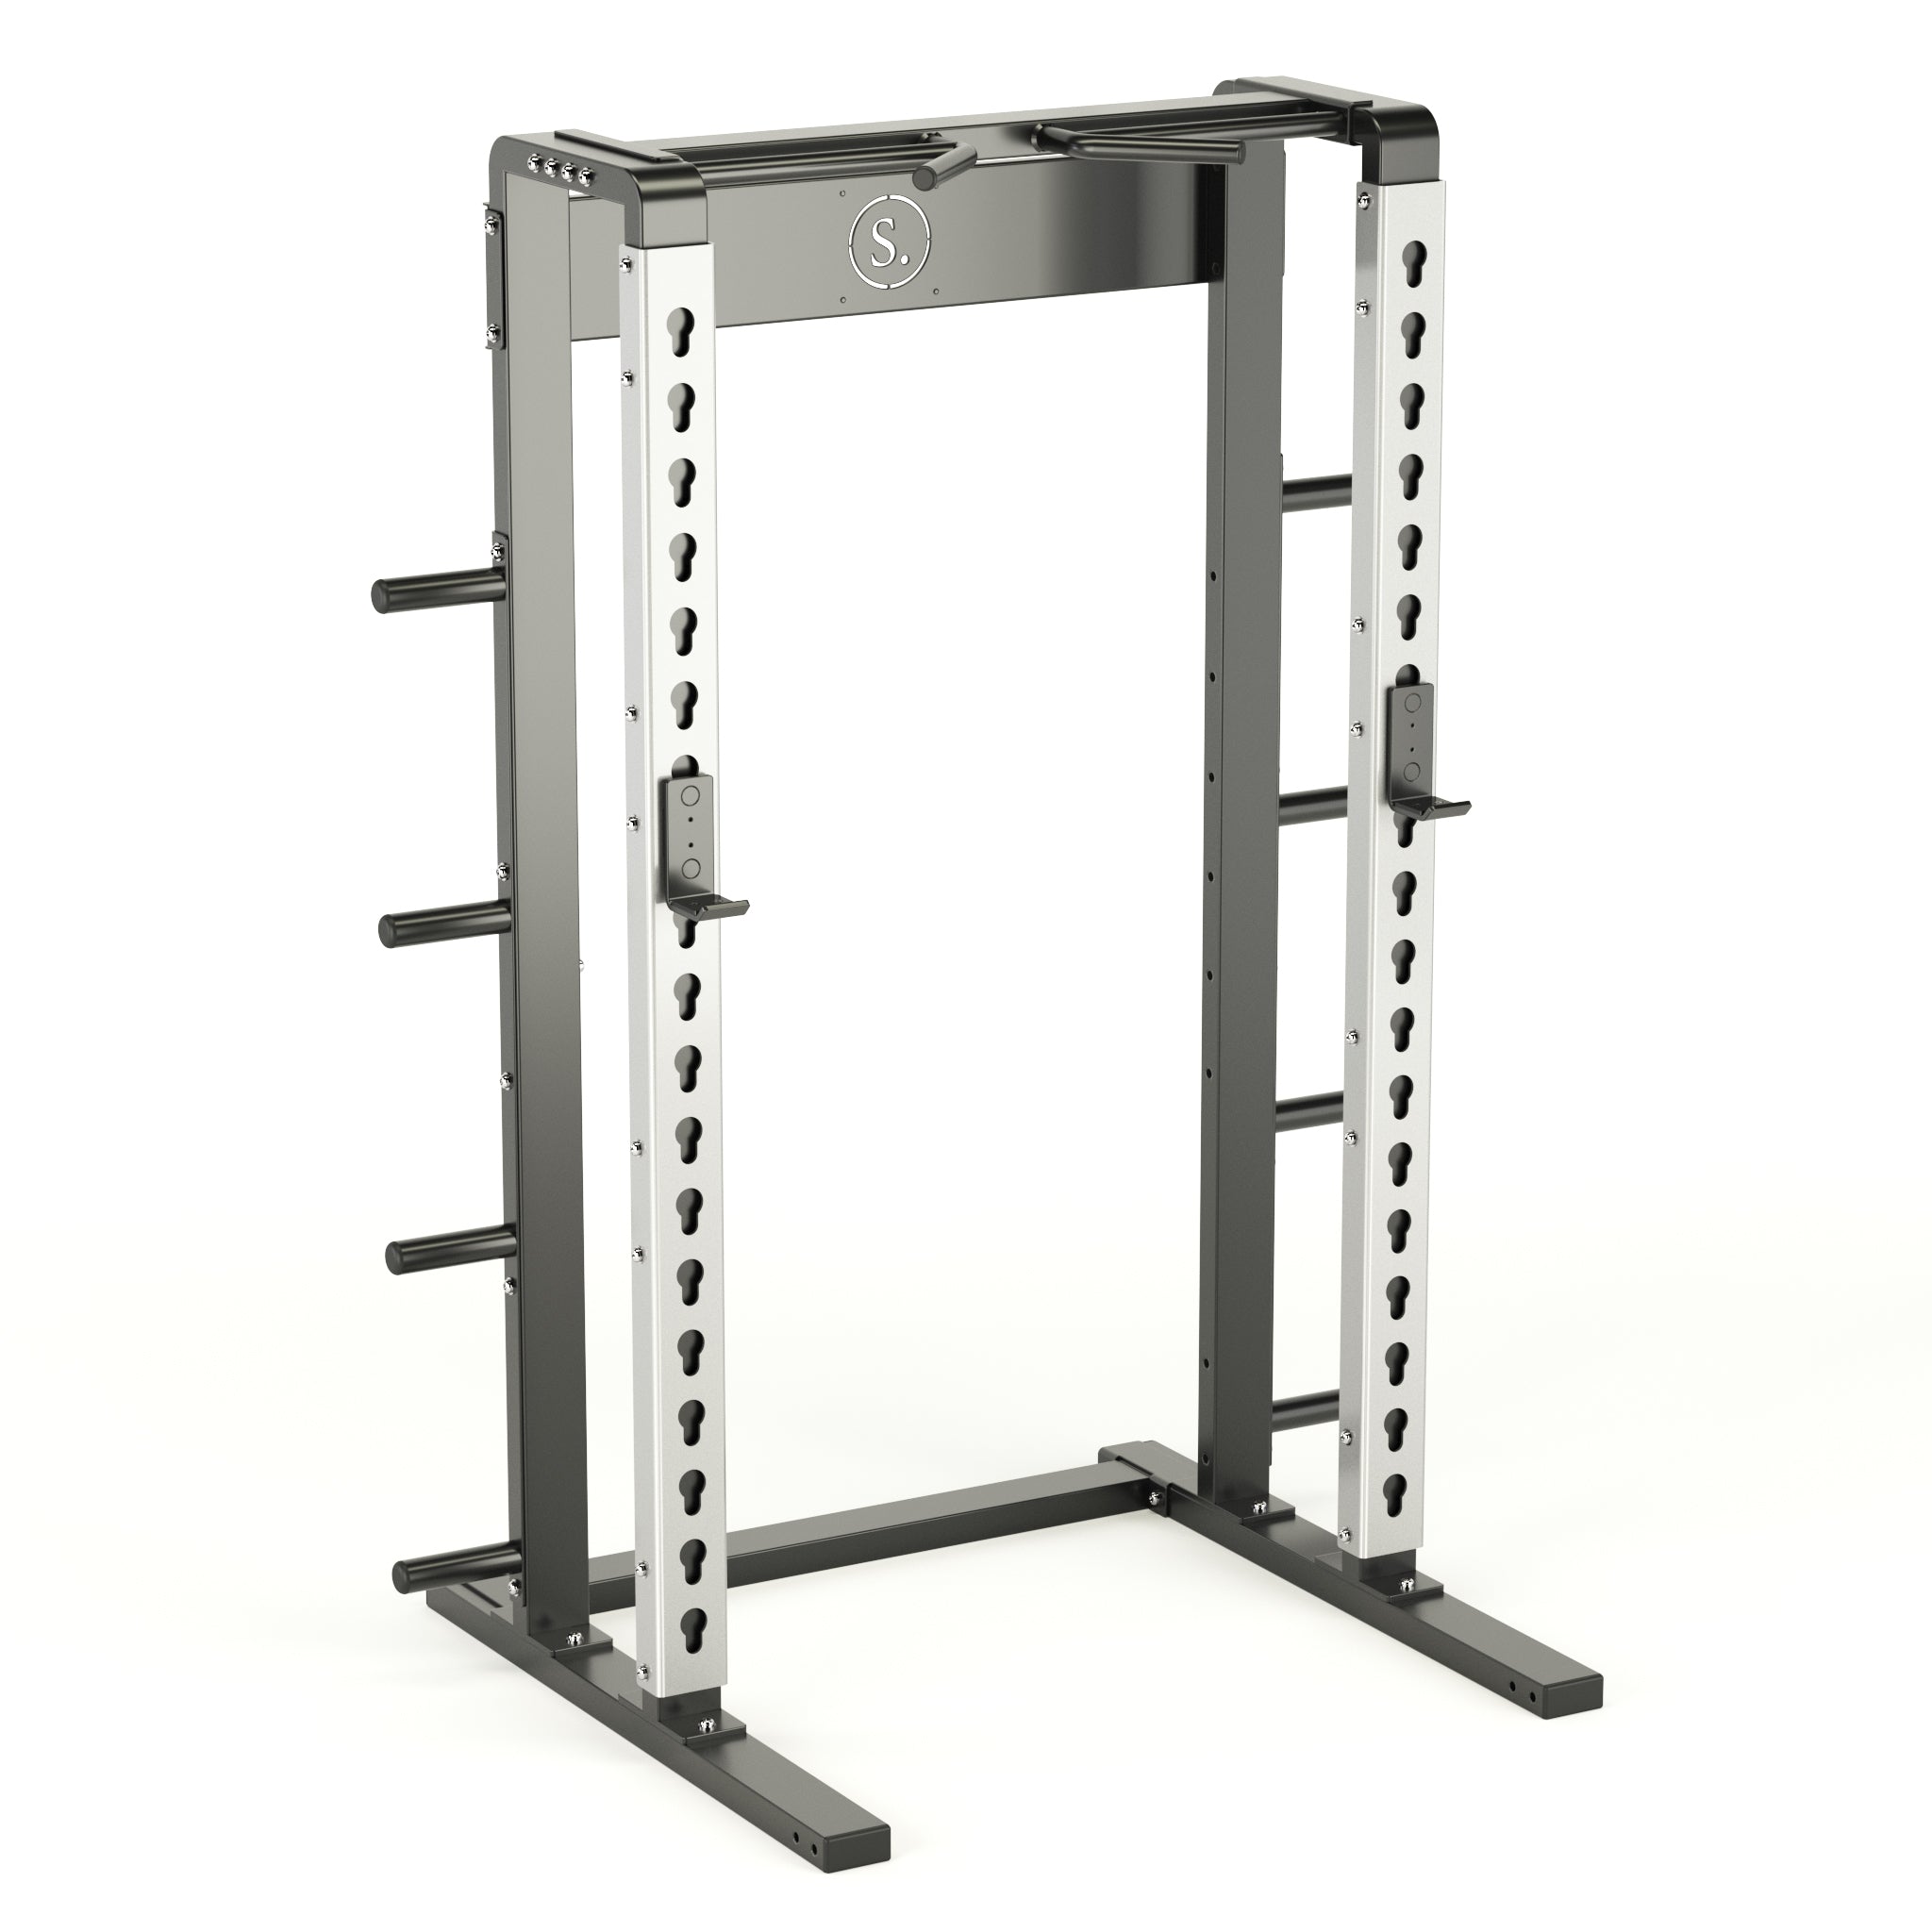 Solo Squat Rack in silver with multi-grip pull-up and weight horns